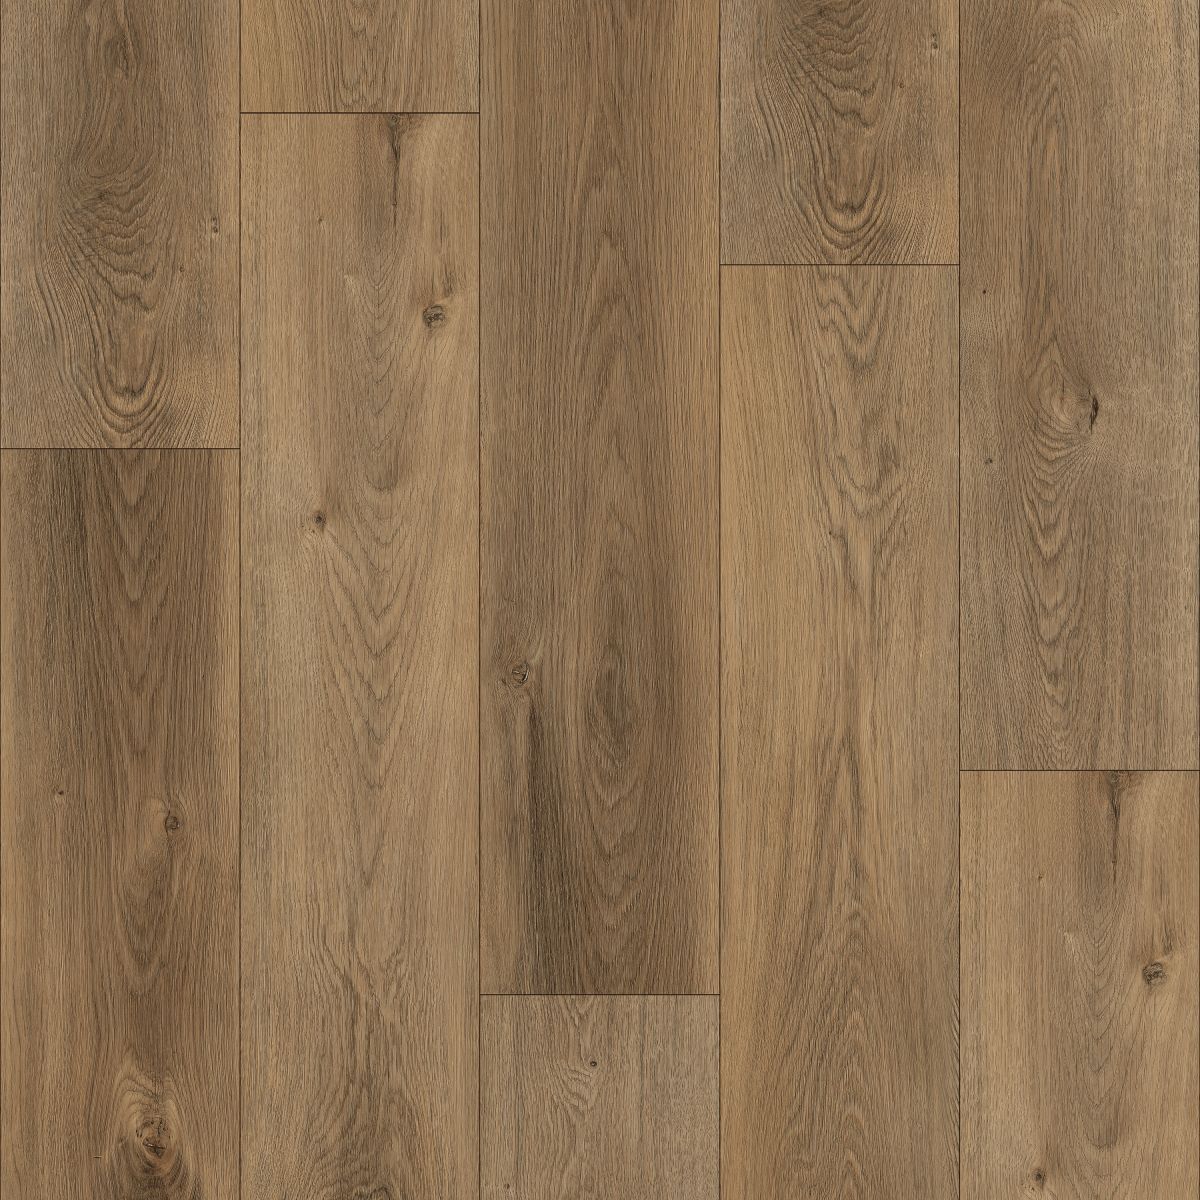 About Heritage Collection, Gluedown LVT